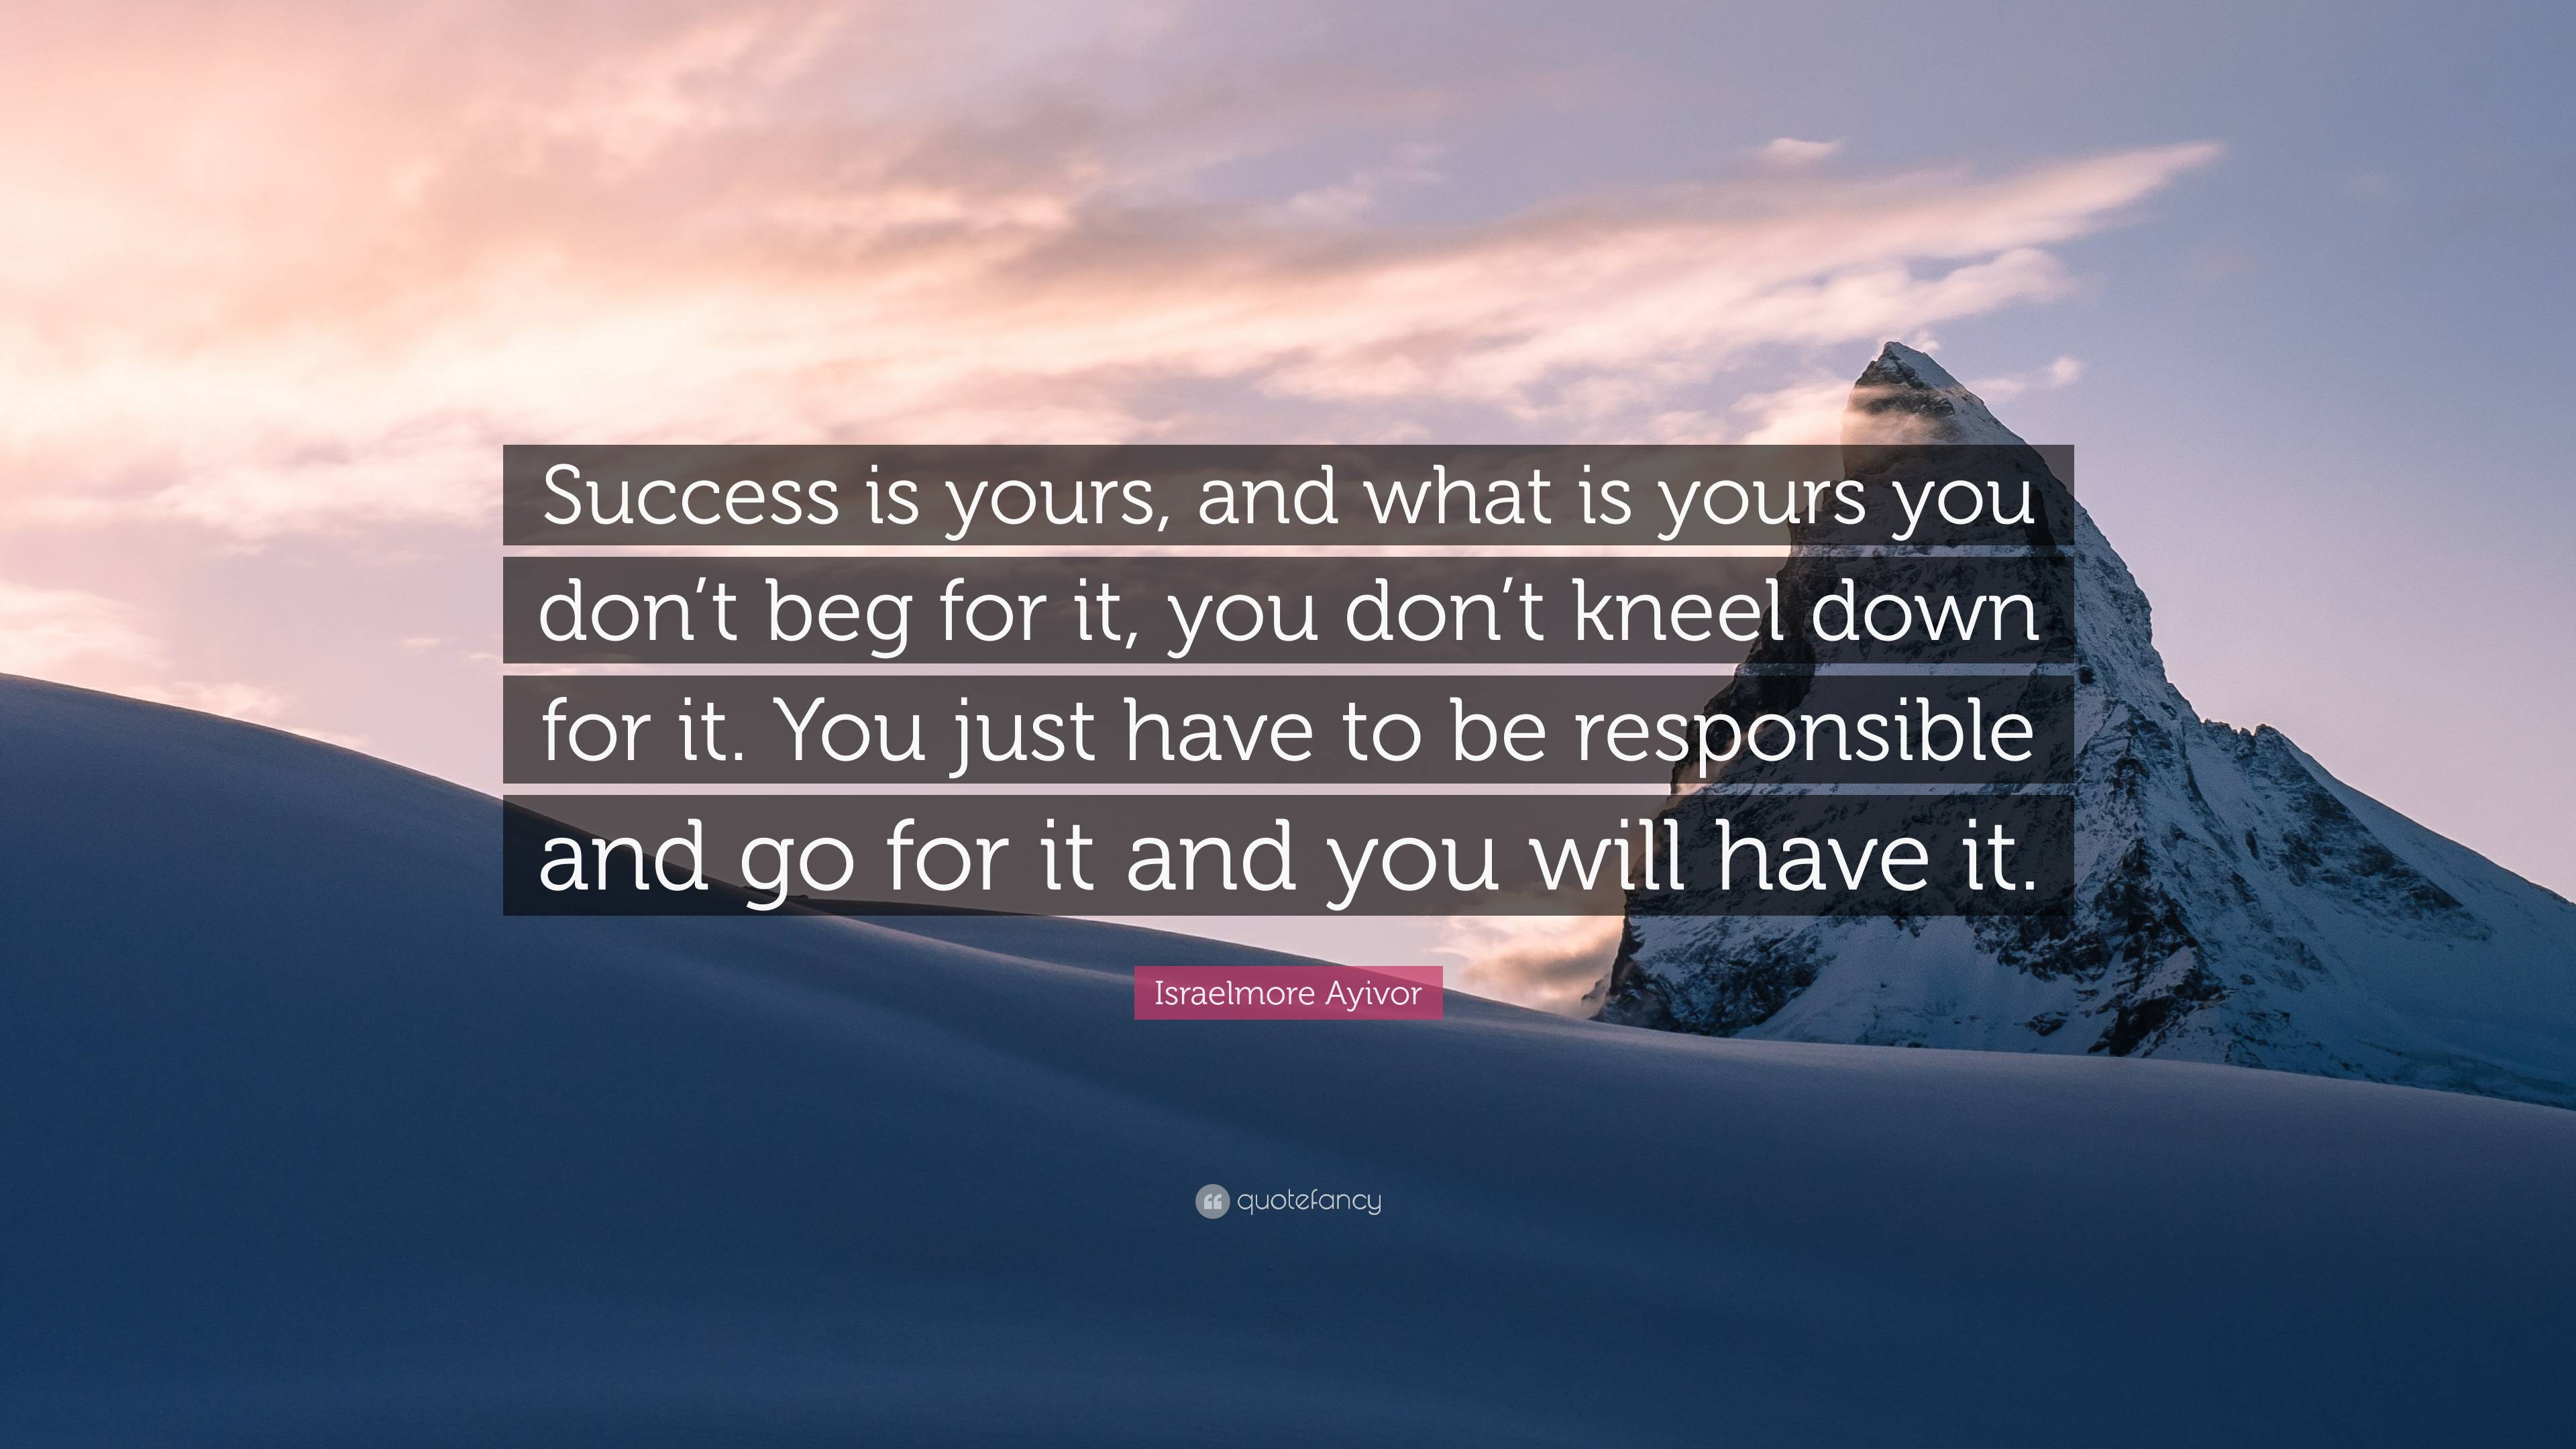 Israelmore Ayivor Quote: “Success is yours, and what is yours you don’t ...